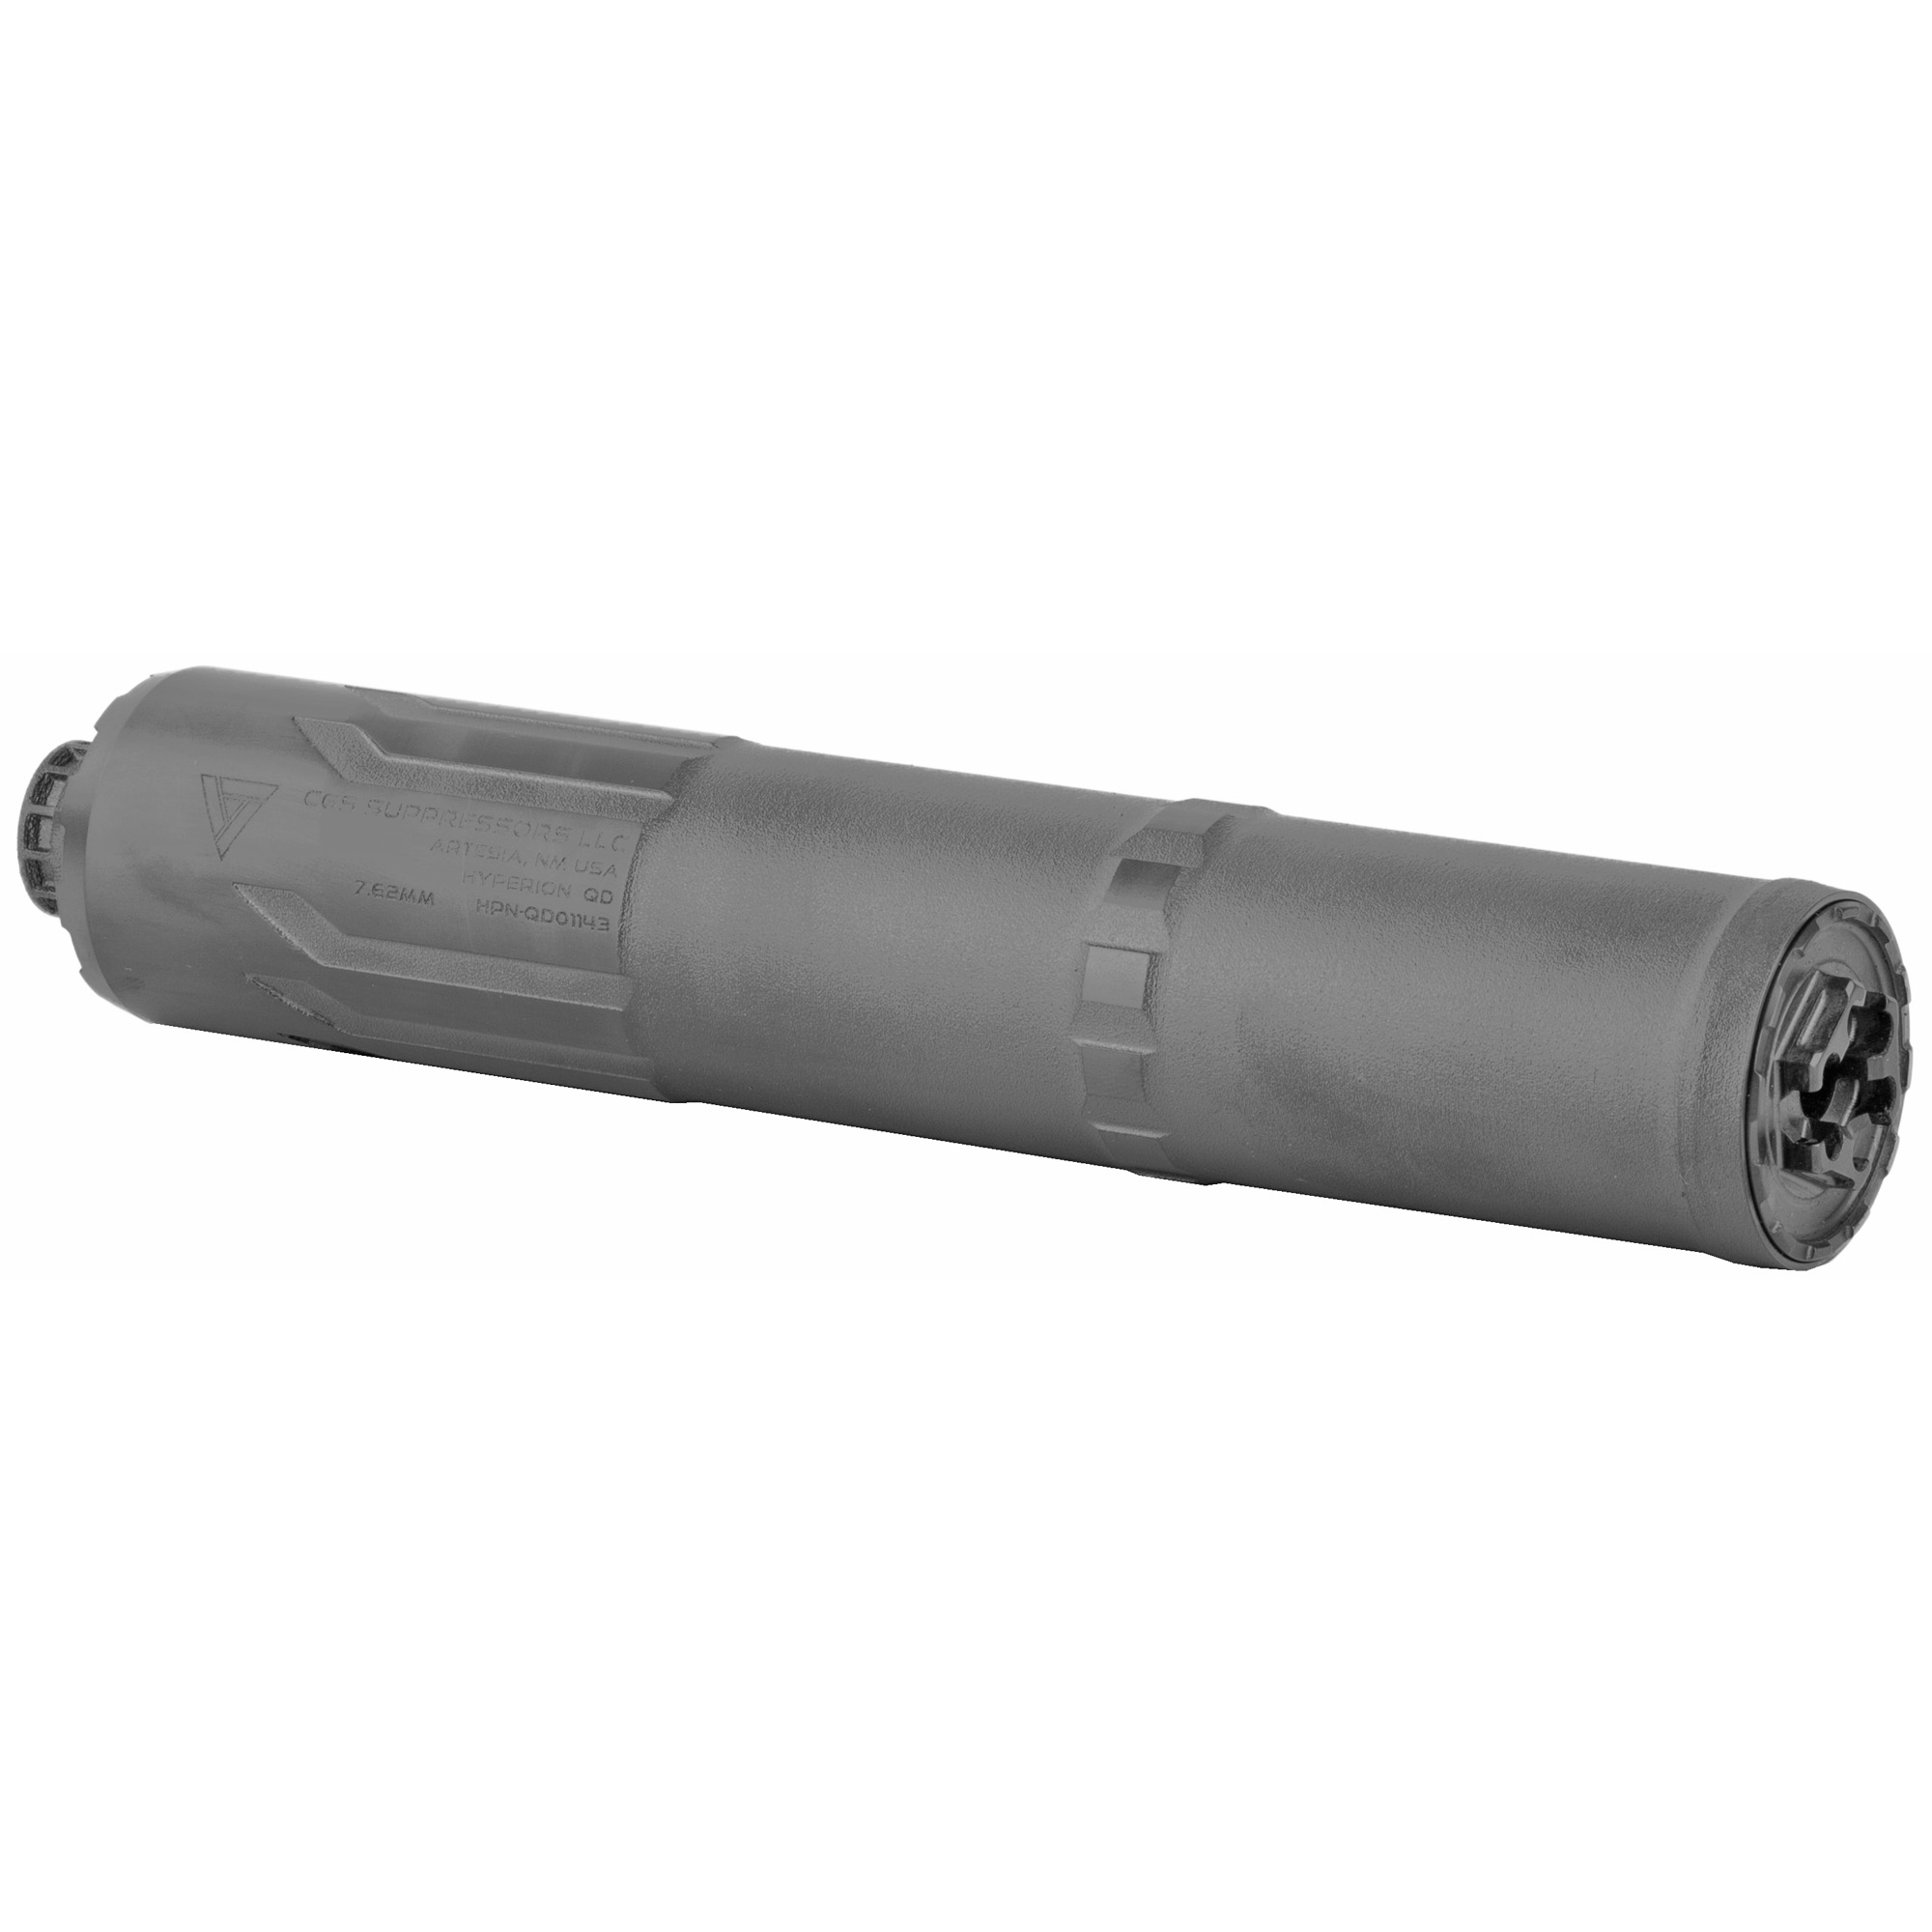 CGS HYPERION 762 SUPPRESSOR BLK - for sale